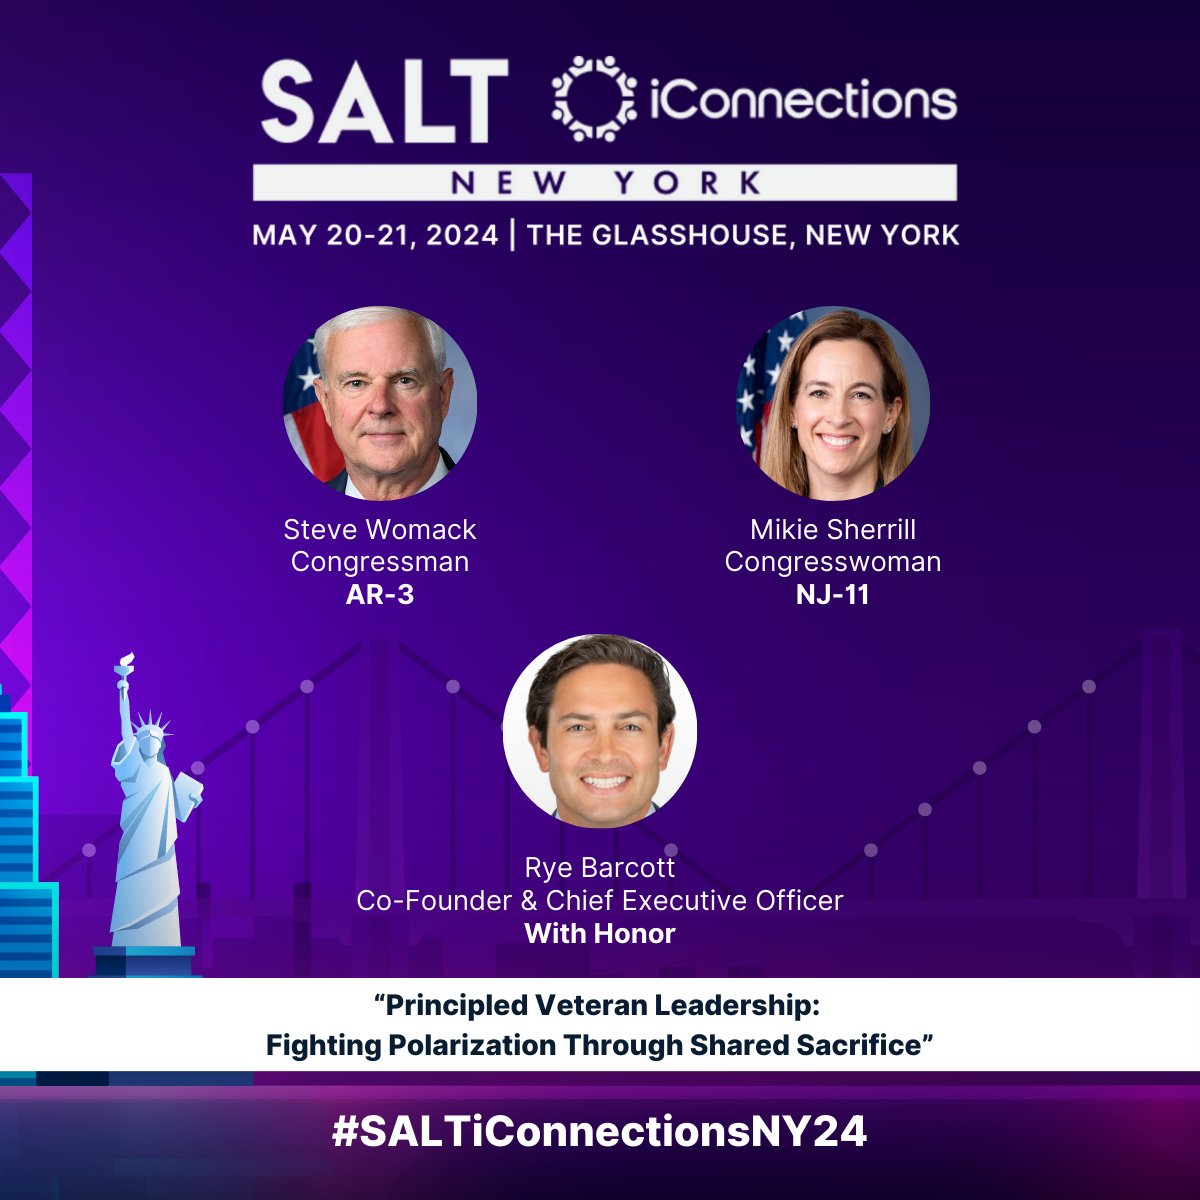 SALT iConnections New York 2024 Panel Announcement! 🎙 “Principled Veteran Leadership: Fighting Polarization Through Shared Sacrifice” Speakers: @rep_stevewomack | AR-3 @RepSherrill | NJ-11 @ryebarcott | @WithHonorAction  #SALTiConnectionsNY @SALTConference